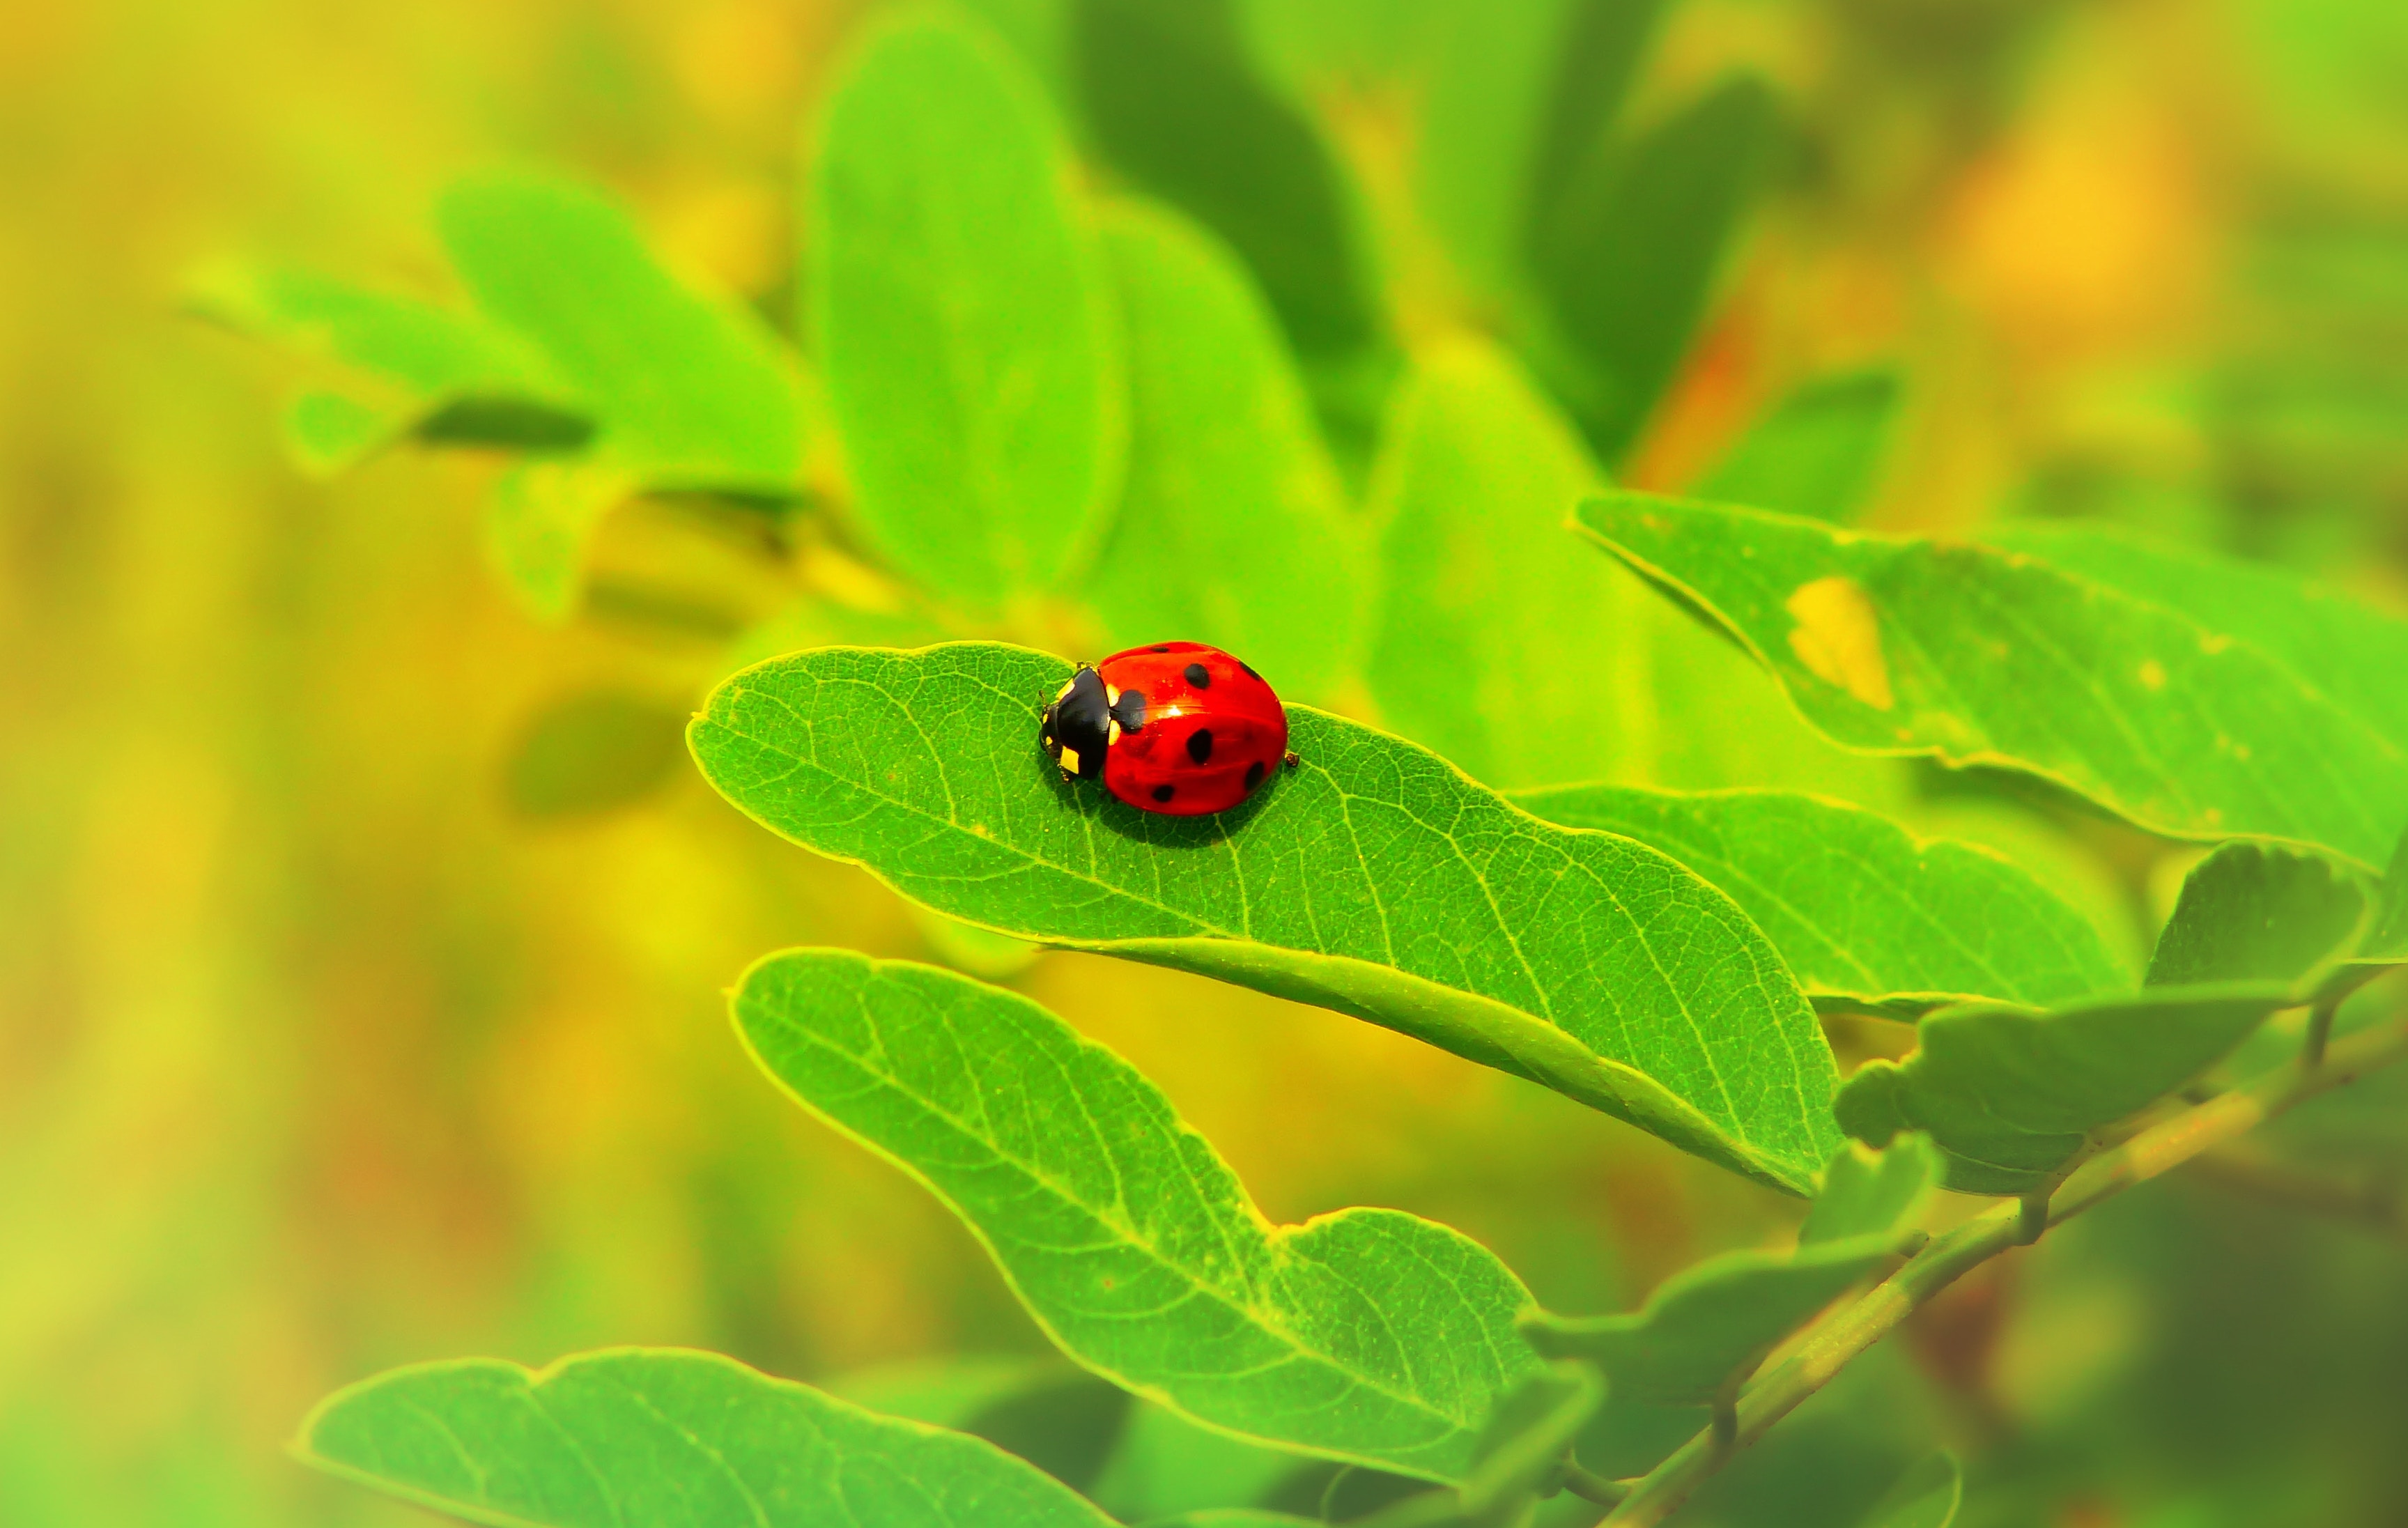 120549 Screensavers and Wallpapers Insect for phone. Download plant, macro, sheet, leaf, insect, ladybug, ladybird pictures for free